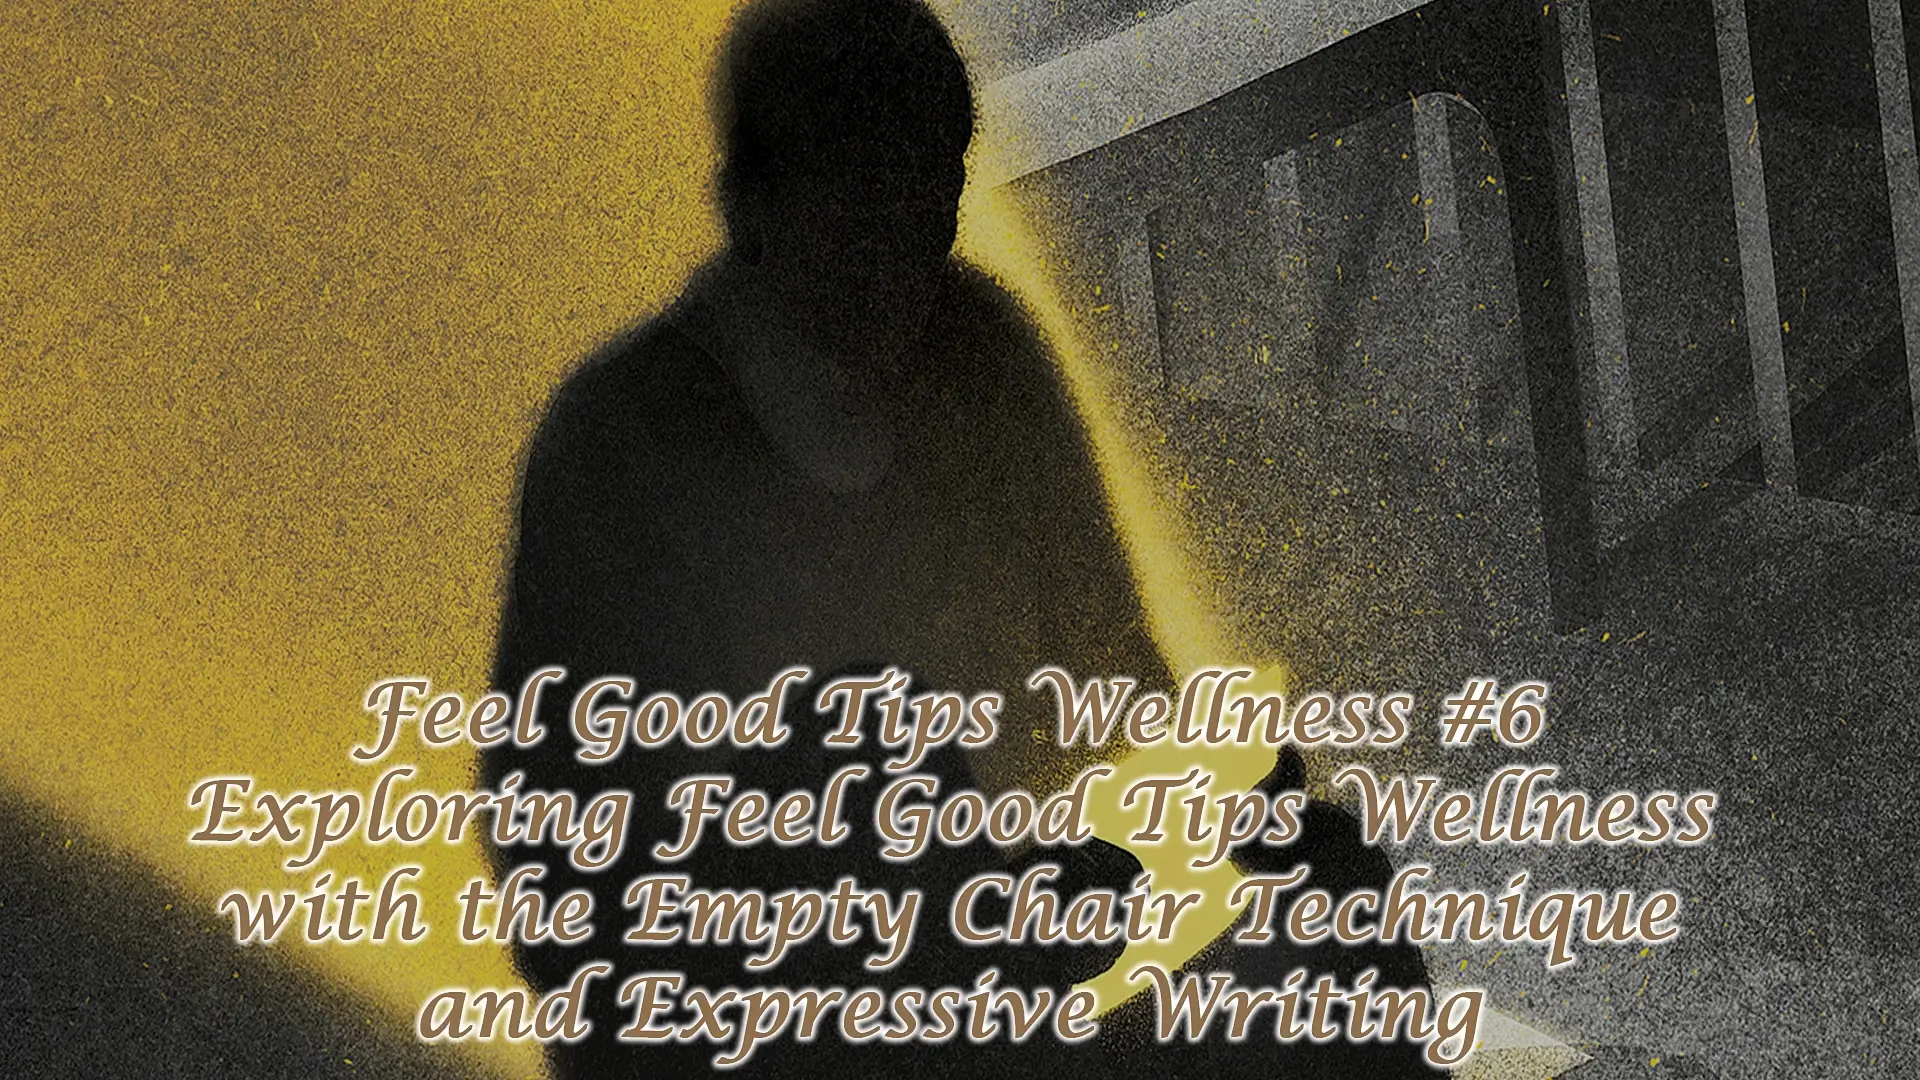 Enhance Your Well-Being: Exploring Feel Good Tips Wellness with the Empty Chair Technique and Expressive Writing